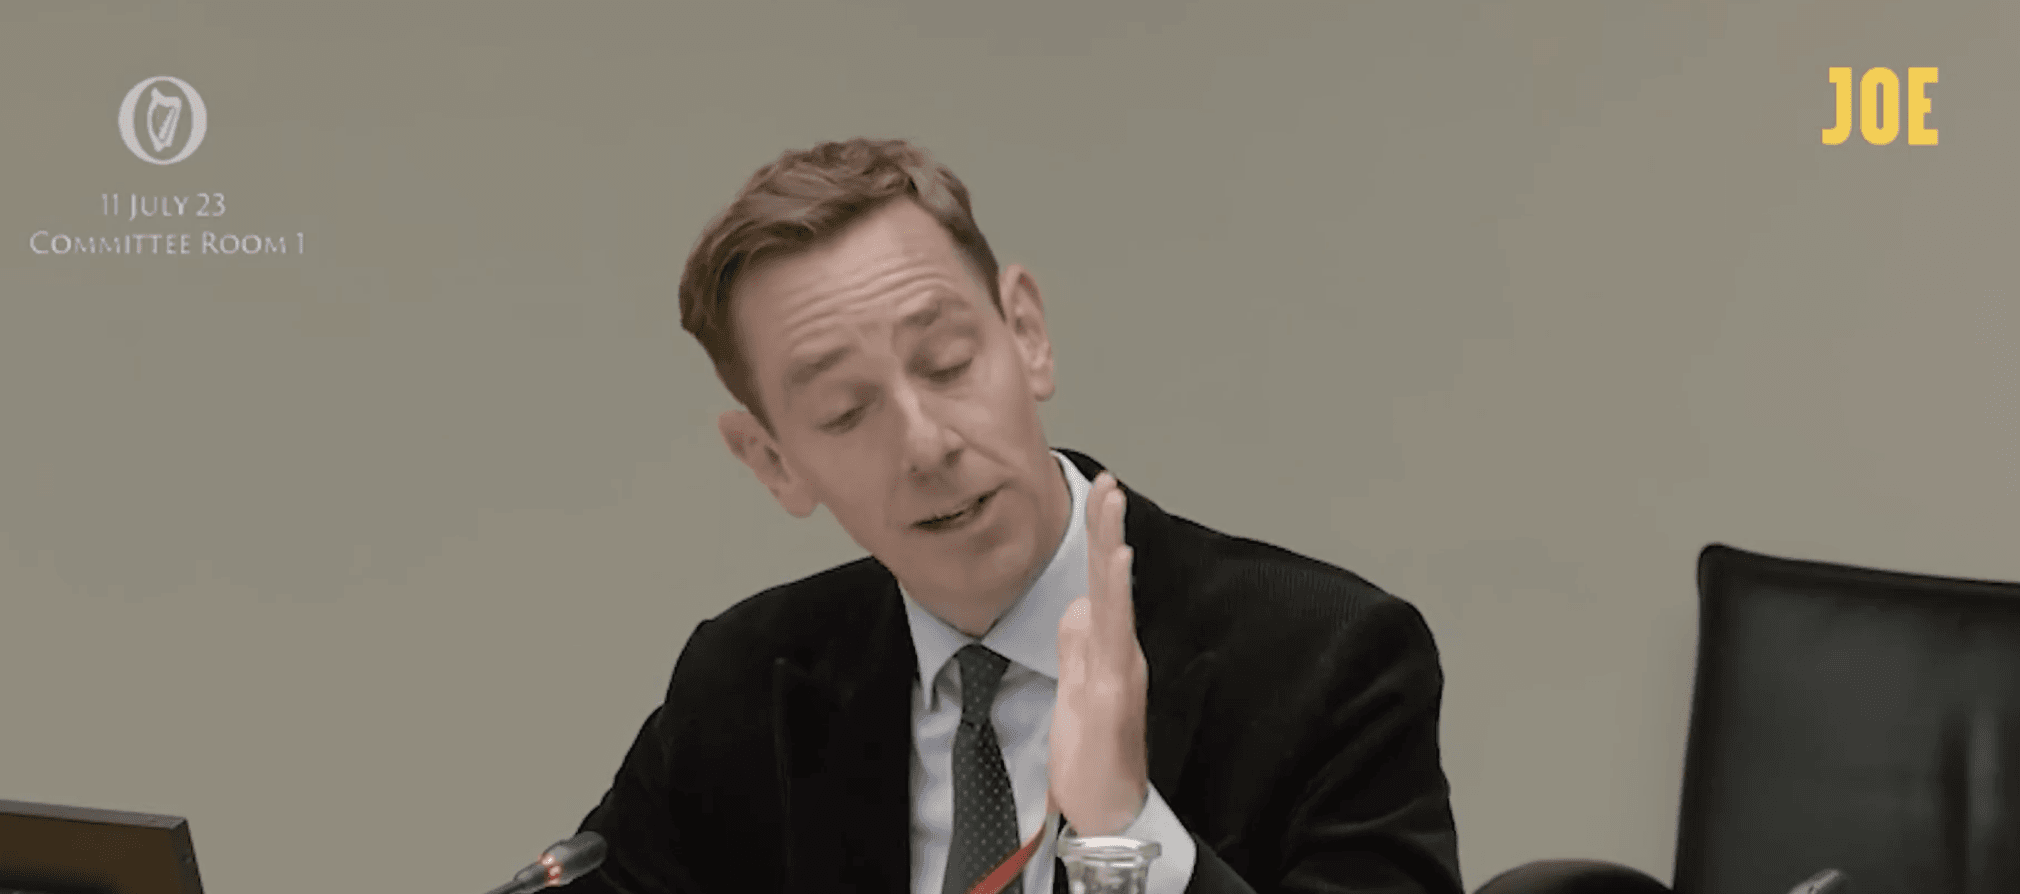 GRILLING: Ryan Tubridy was by turns forceful and emotional while giving evidence